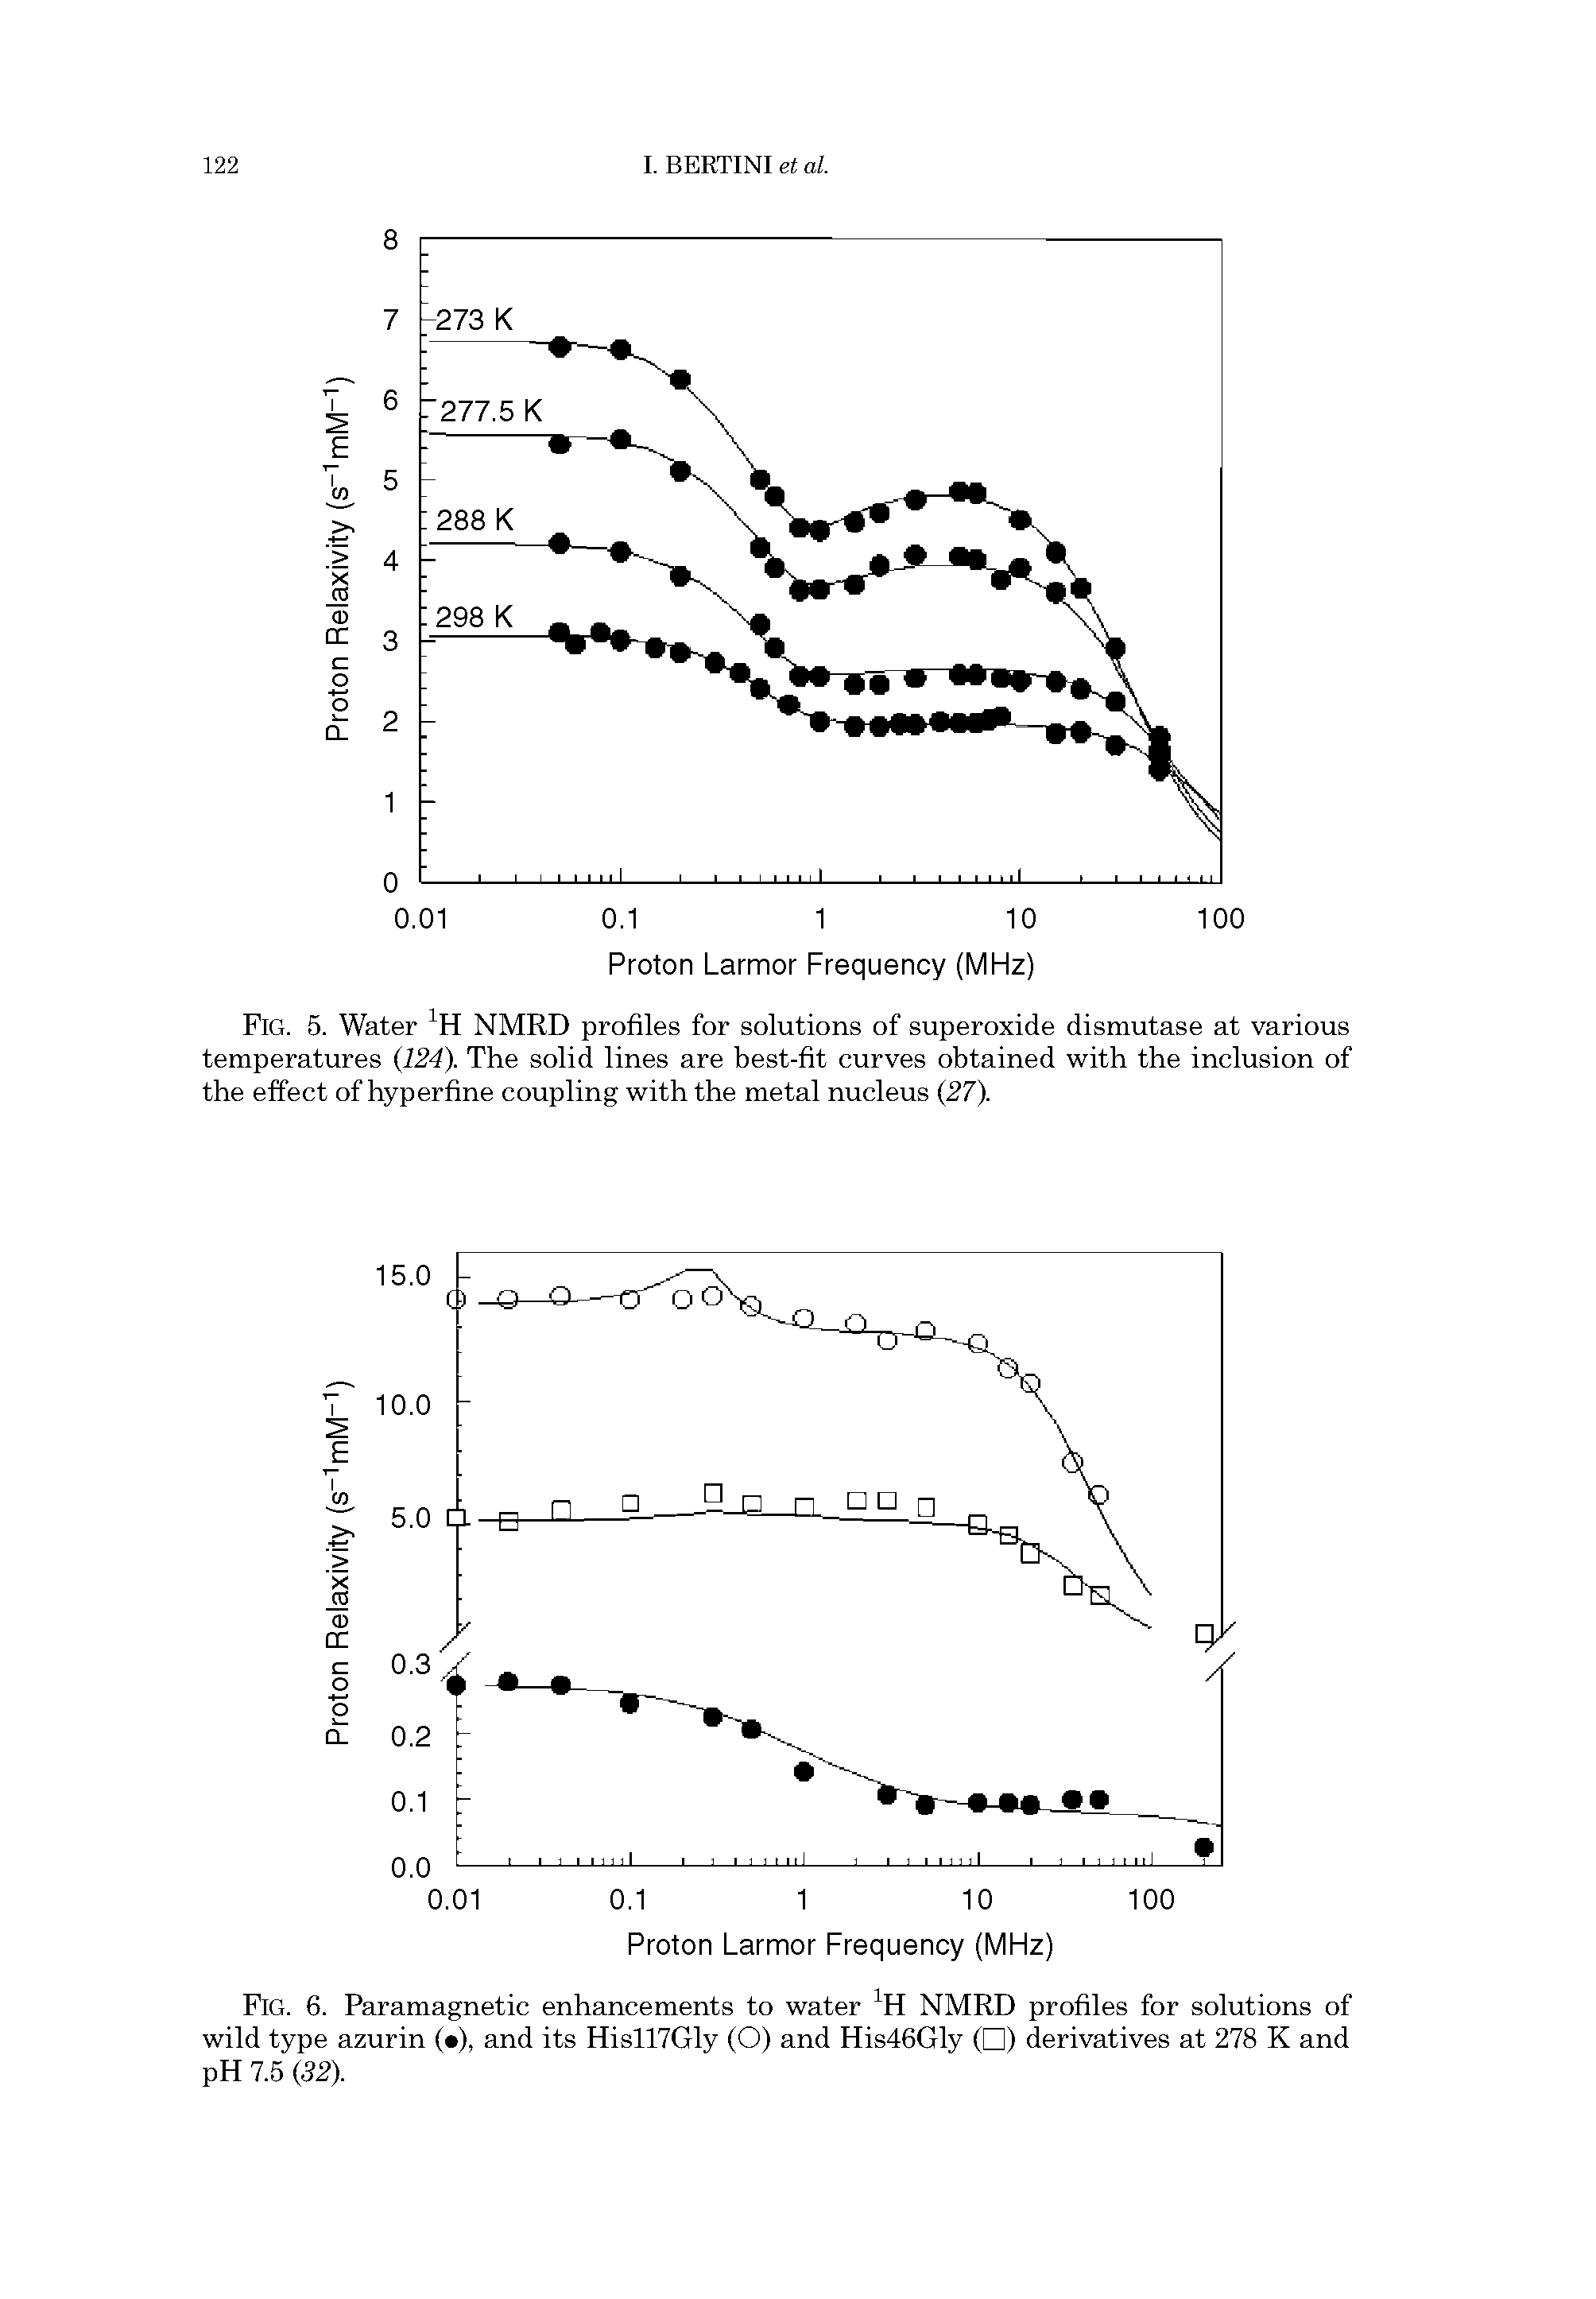 Fig. 5. Water NMRD profiles for solutions of superoxide dismutase at various temperatures (124). The solid lines are best-fit curves obtained with the inclusion of the effect of hyperfine coupling with the metal nucleus (27).